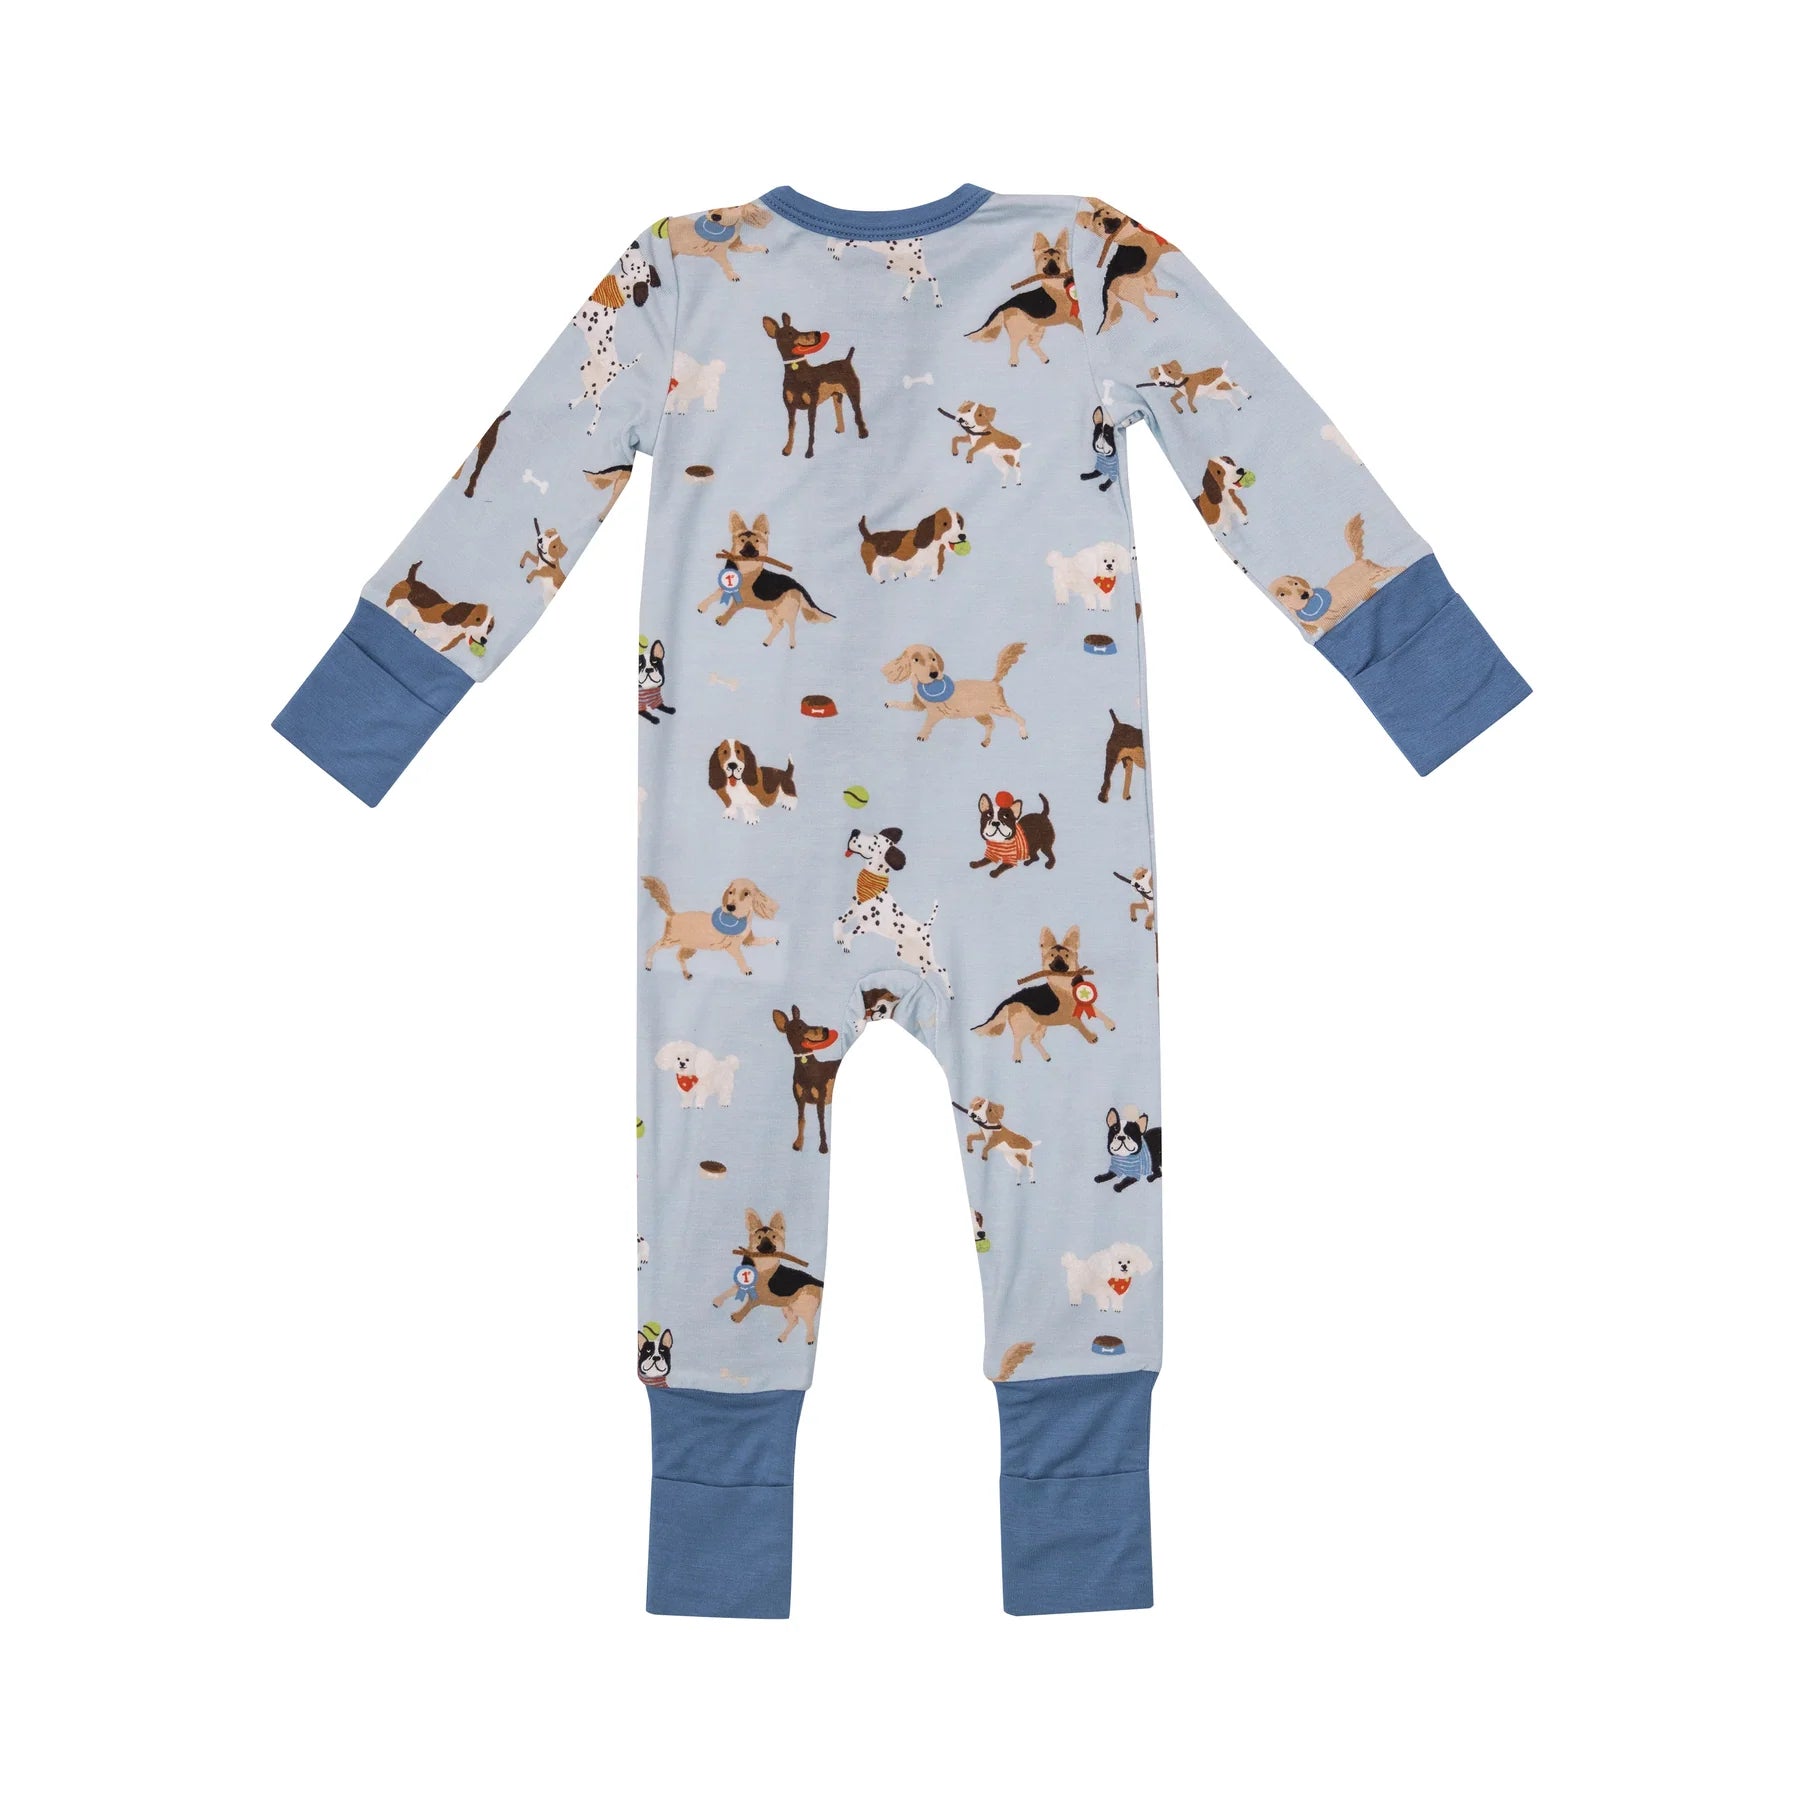 2 Way Zipper Romper in Doggy Daycare Blue  - Doodlebug's Children's Boutique